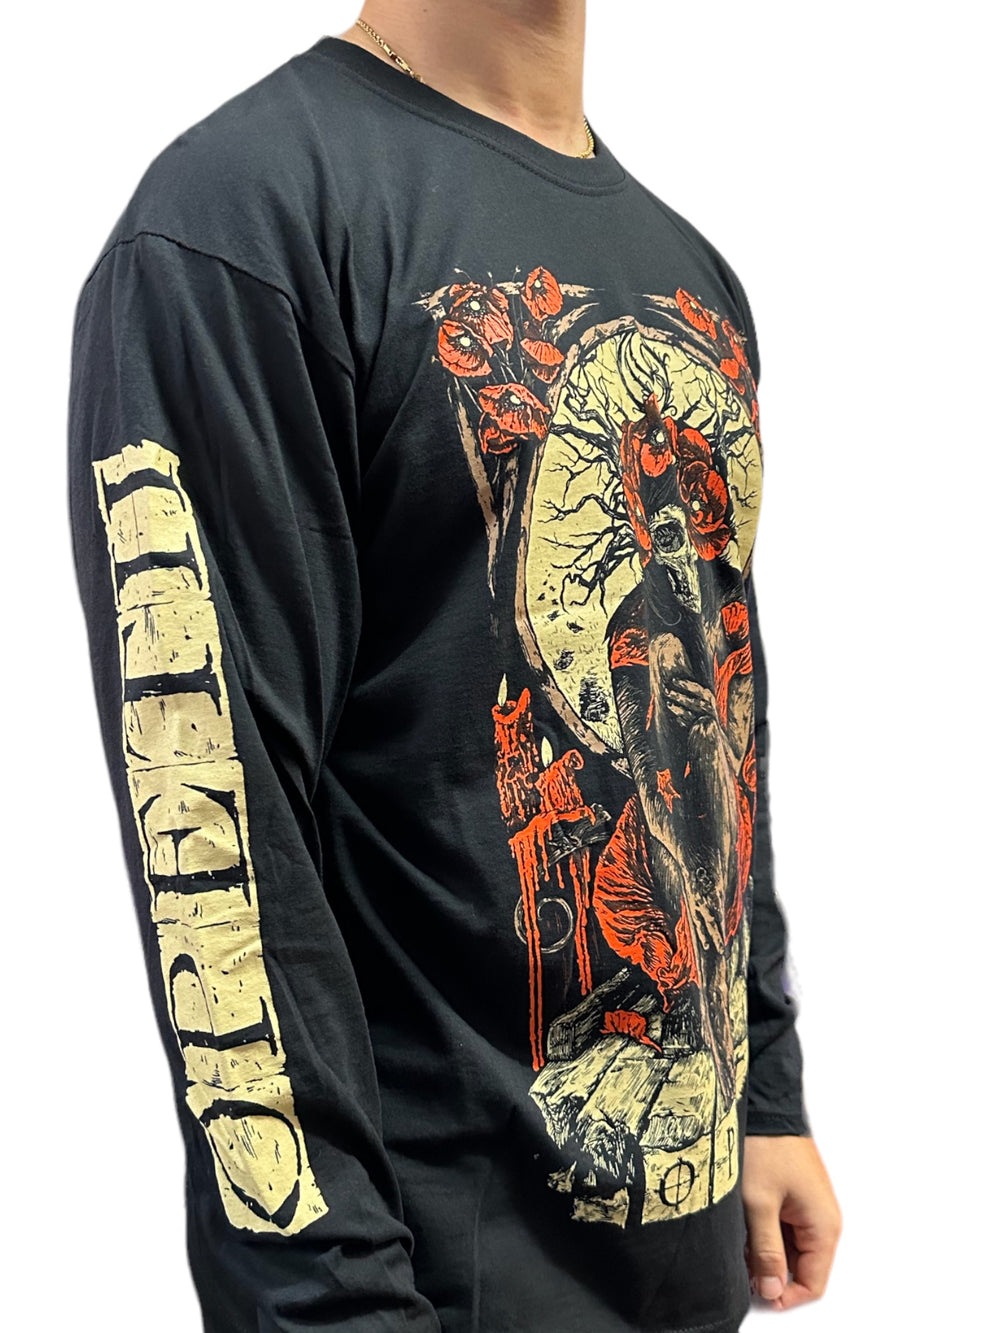 Opeth Haxprosses Official Unisex Long Sleeved Shirt Various Sizes Front & Sleeve Print: NEW